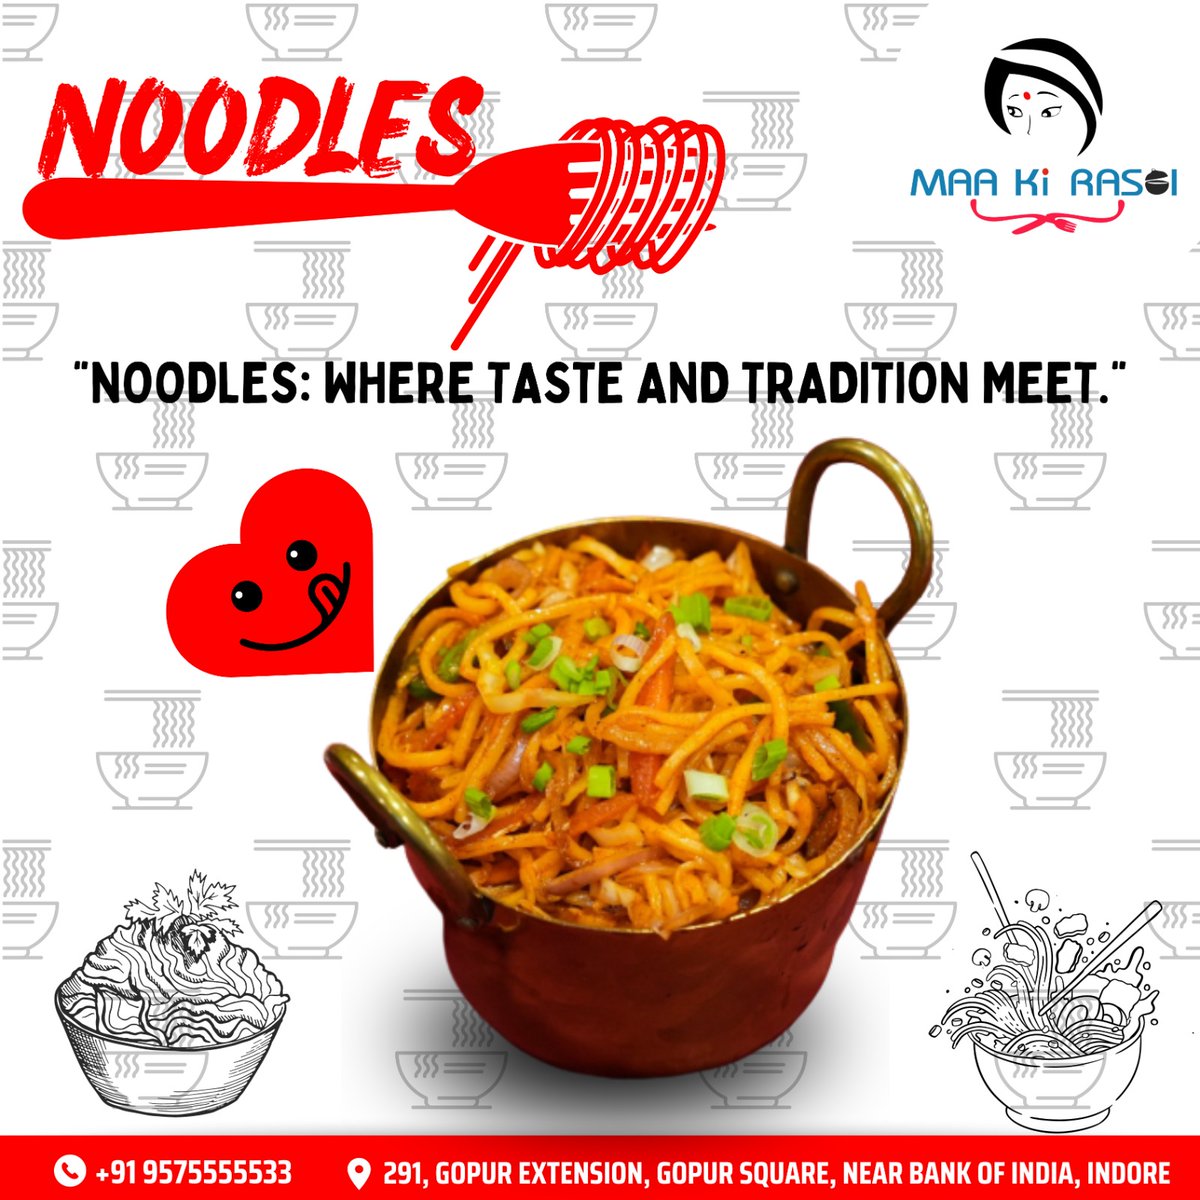 Who's Up for a Noodle Challenge? Test Your Limits with Our Spicy Options 🔥
.
Trying Not to Slurp Up All the Noodles Like...🙊
.
Tag Your Noodle-Loving Squad and Plan Your Next Indore Adventure!👥🌟
.
#NoodleLovers #IndoreEats #MaaKiRasoi #FoodiesUnite #NoodleChallenge